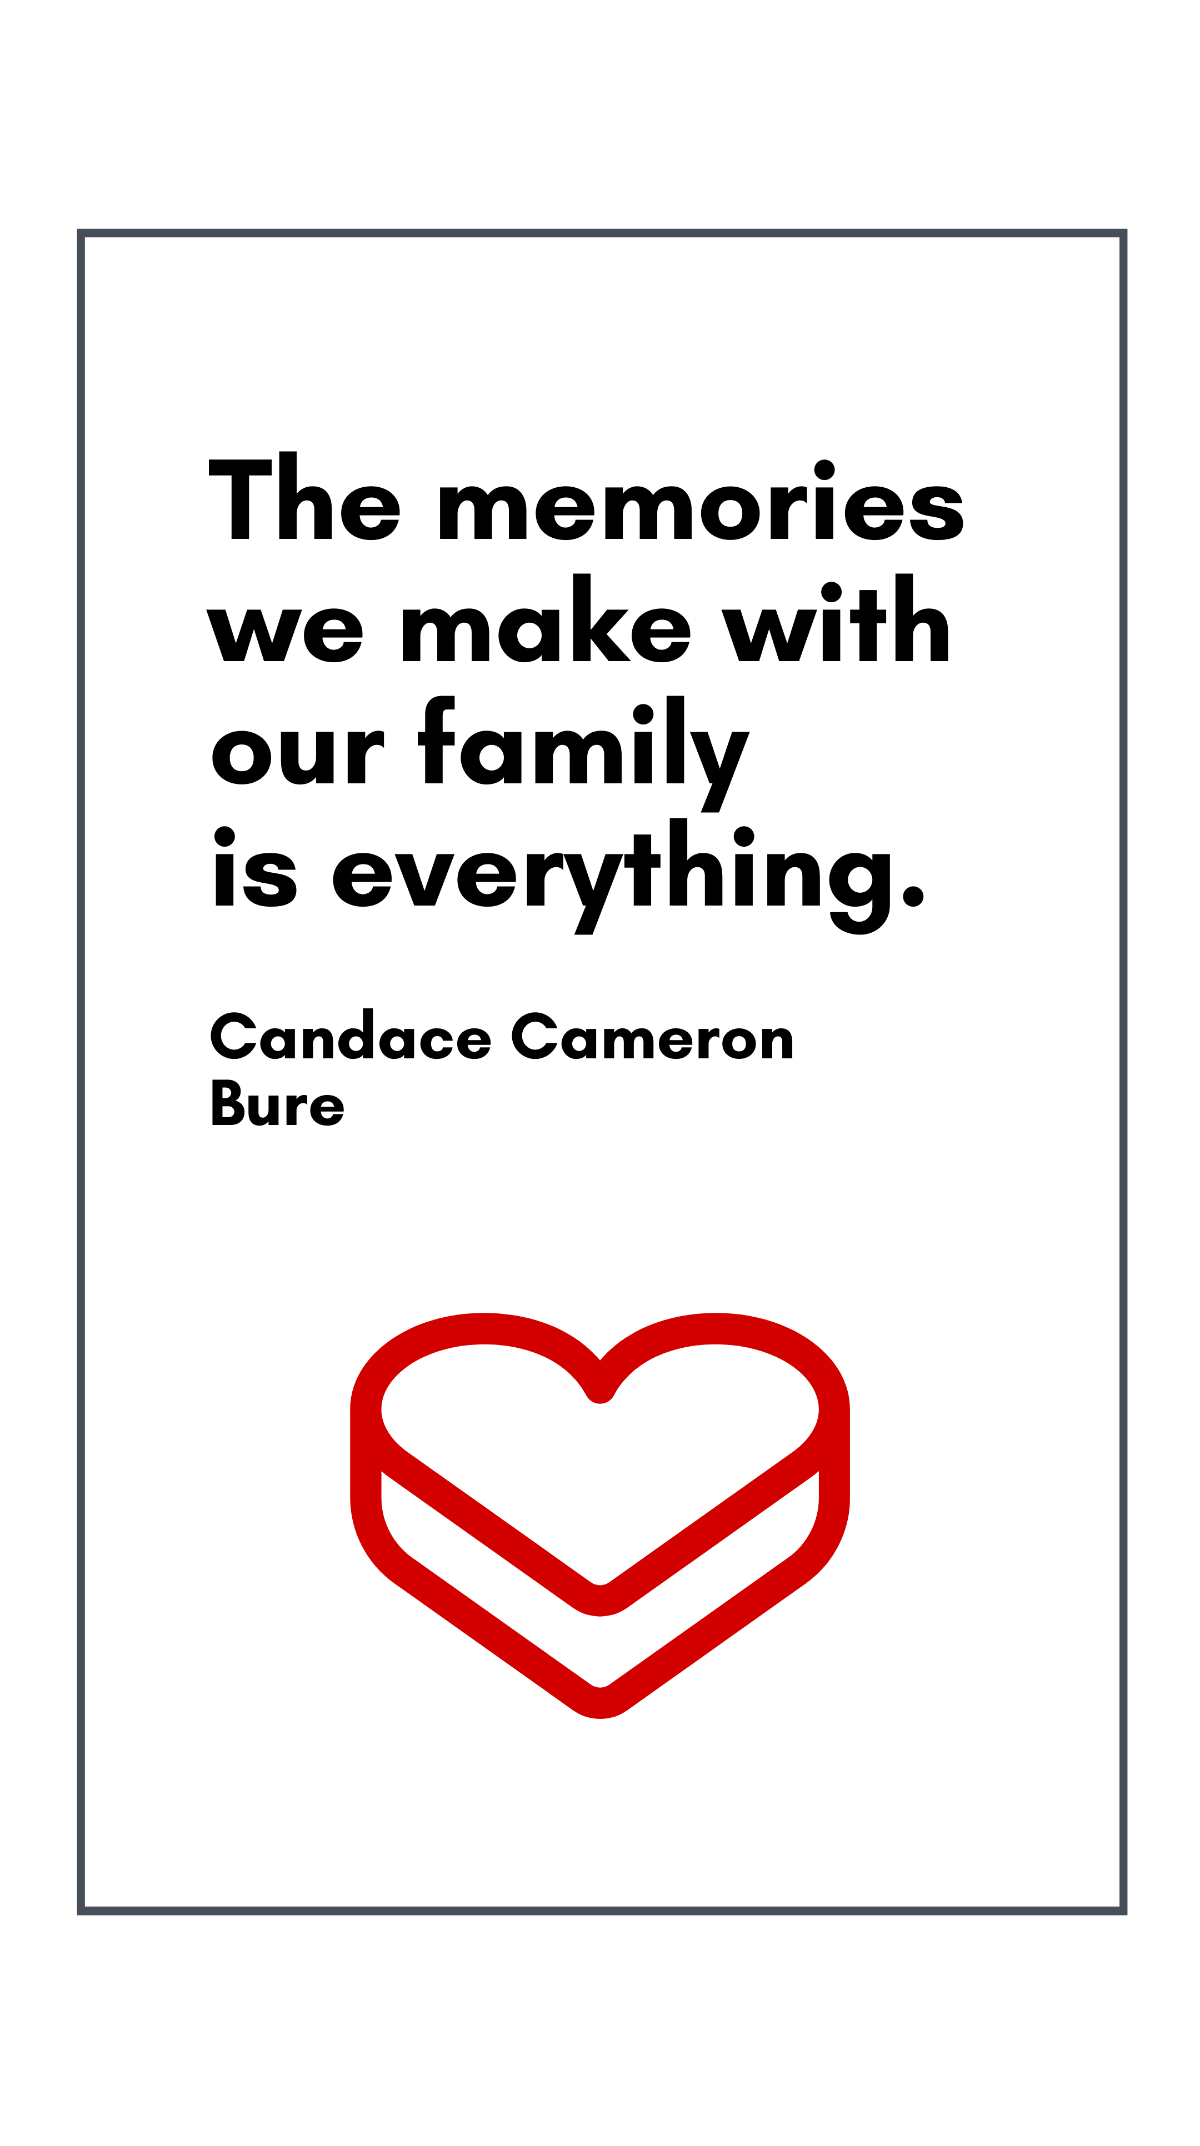 Candace Cameron Bure - The memories we make with our family is everything.